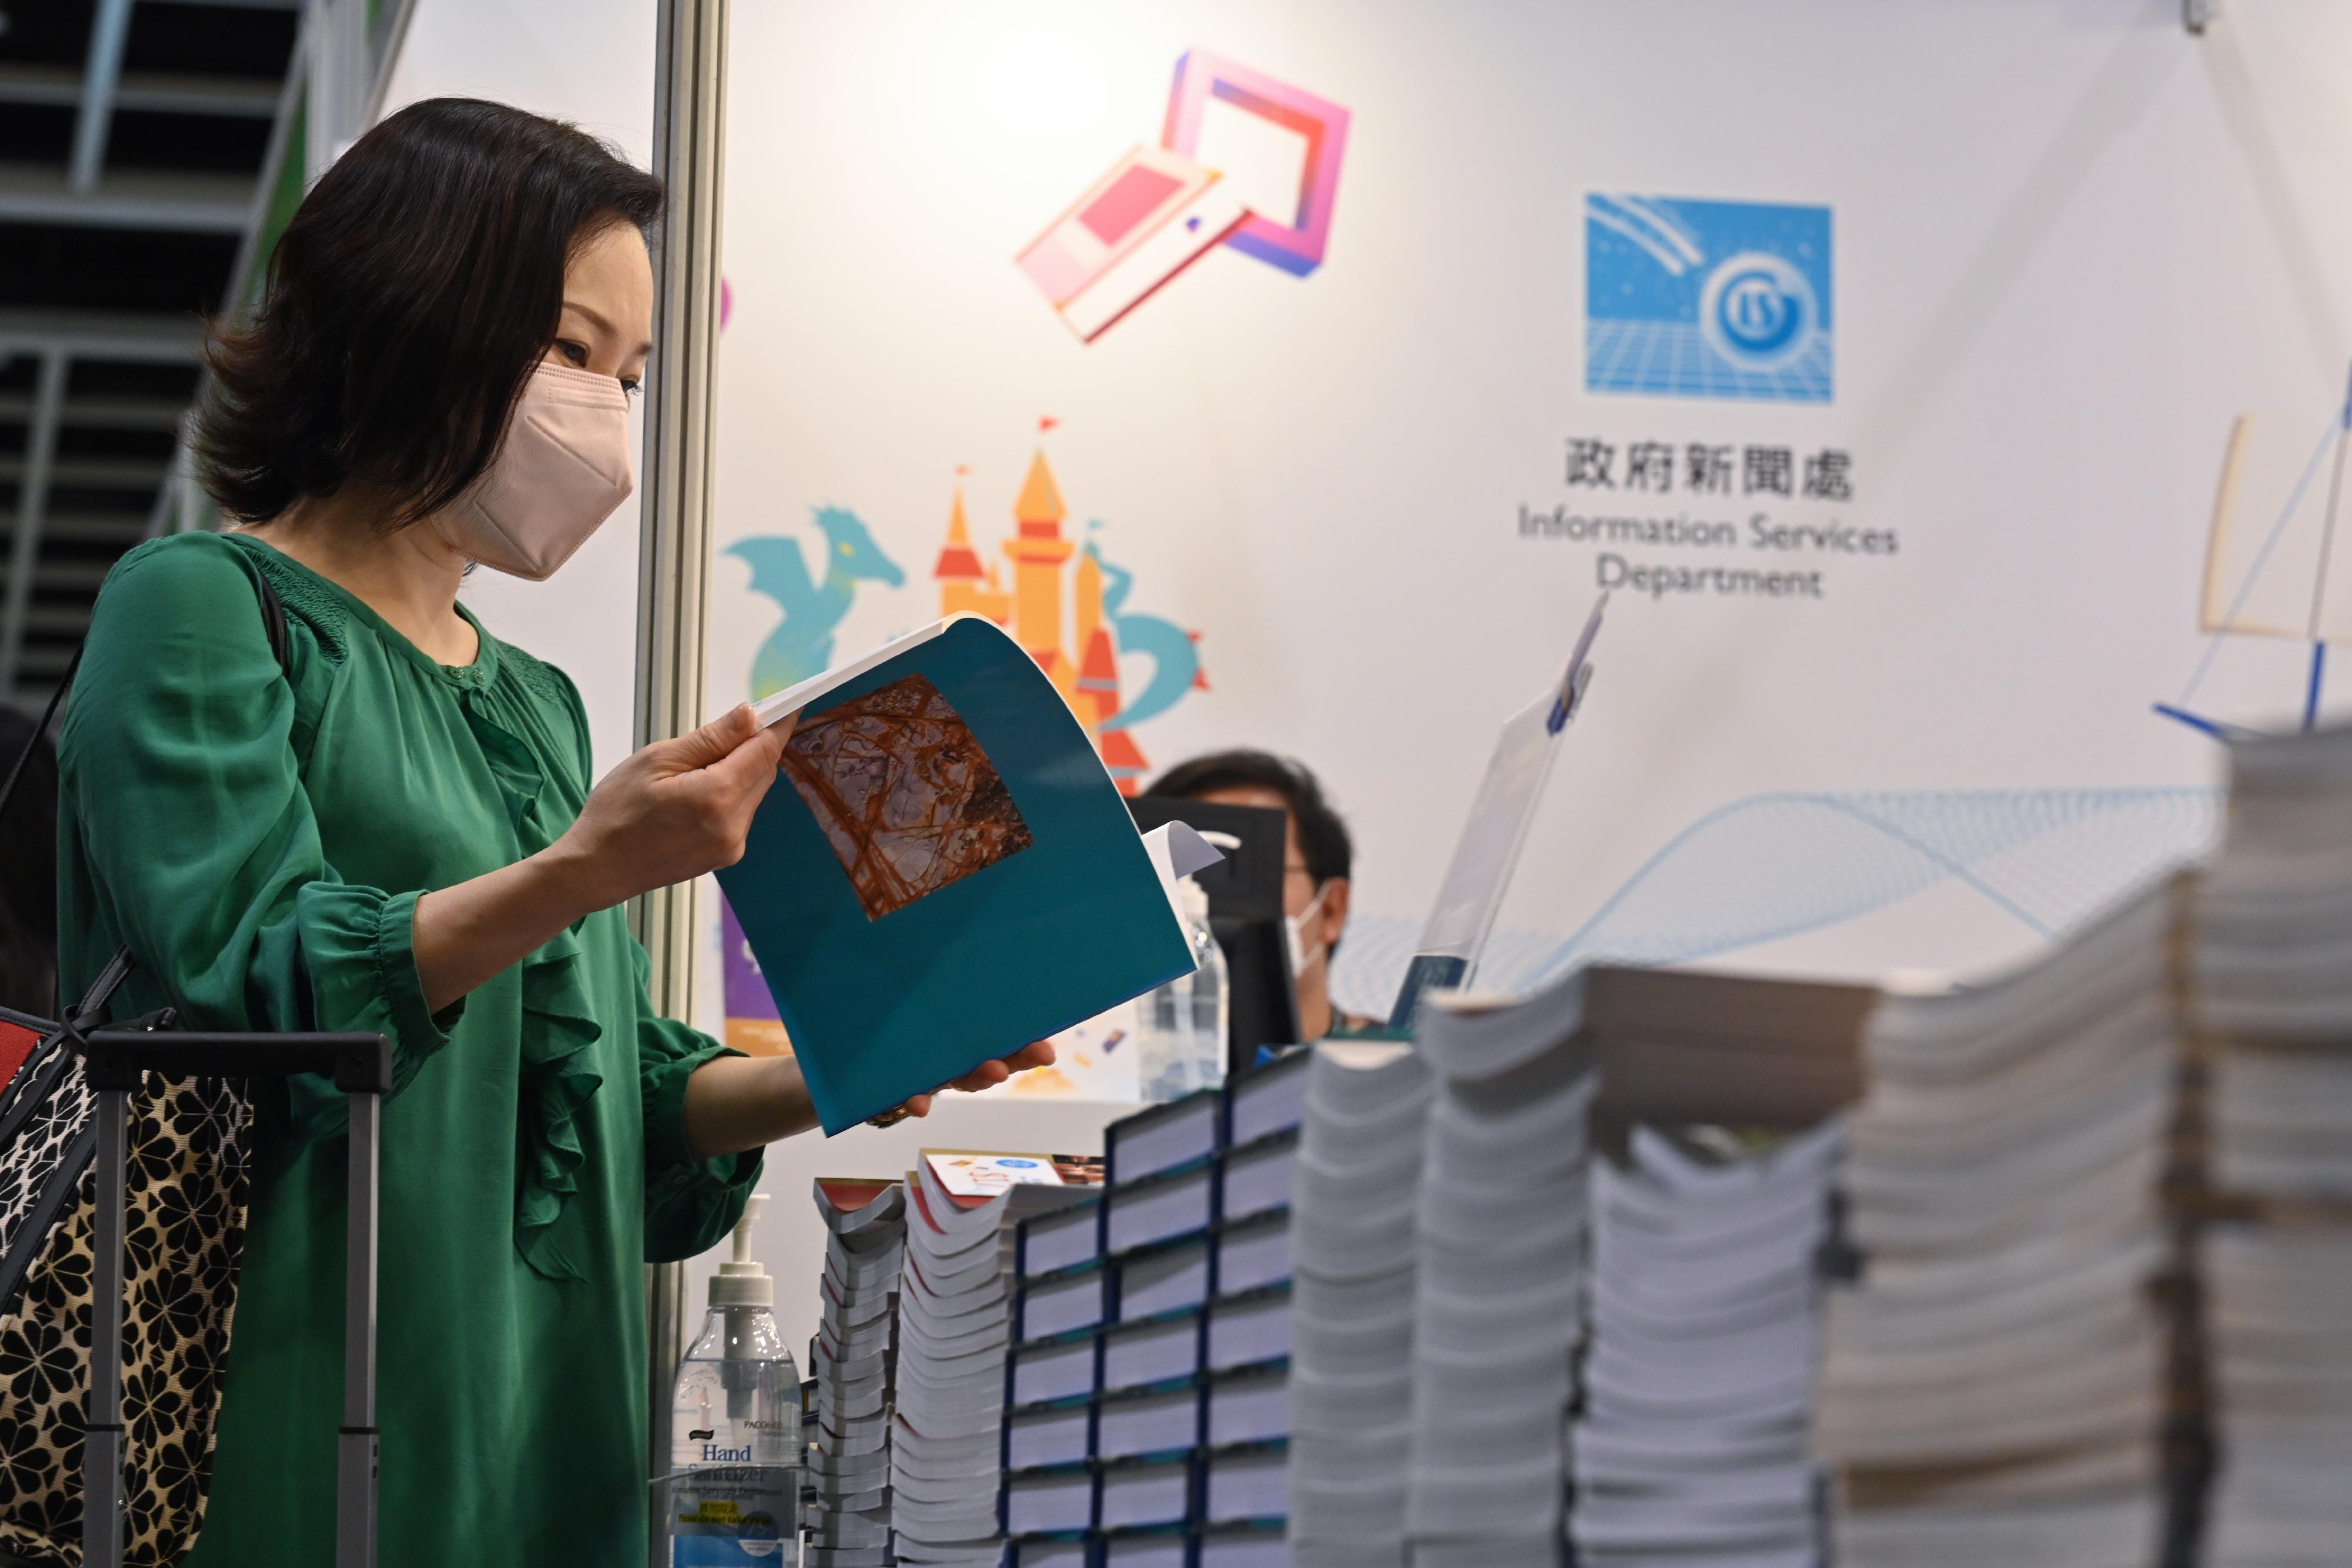 The Information Services Department (ISD) is taking part in this year's Hong Kong Book Fair from today (July 20) to July 26 under the theme "Unlimited Exploration". Photo shows a reader visiting the ISD booth at Stall D37 in Hall 1A for publications.